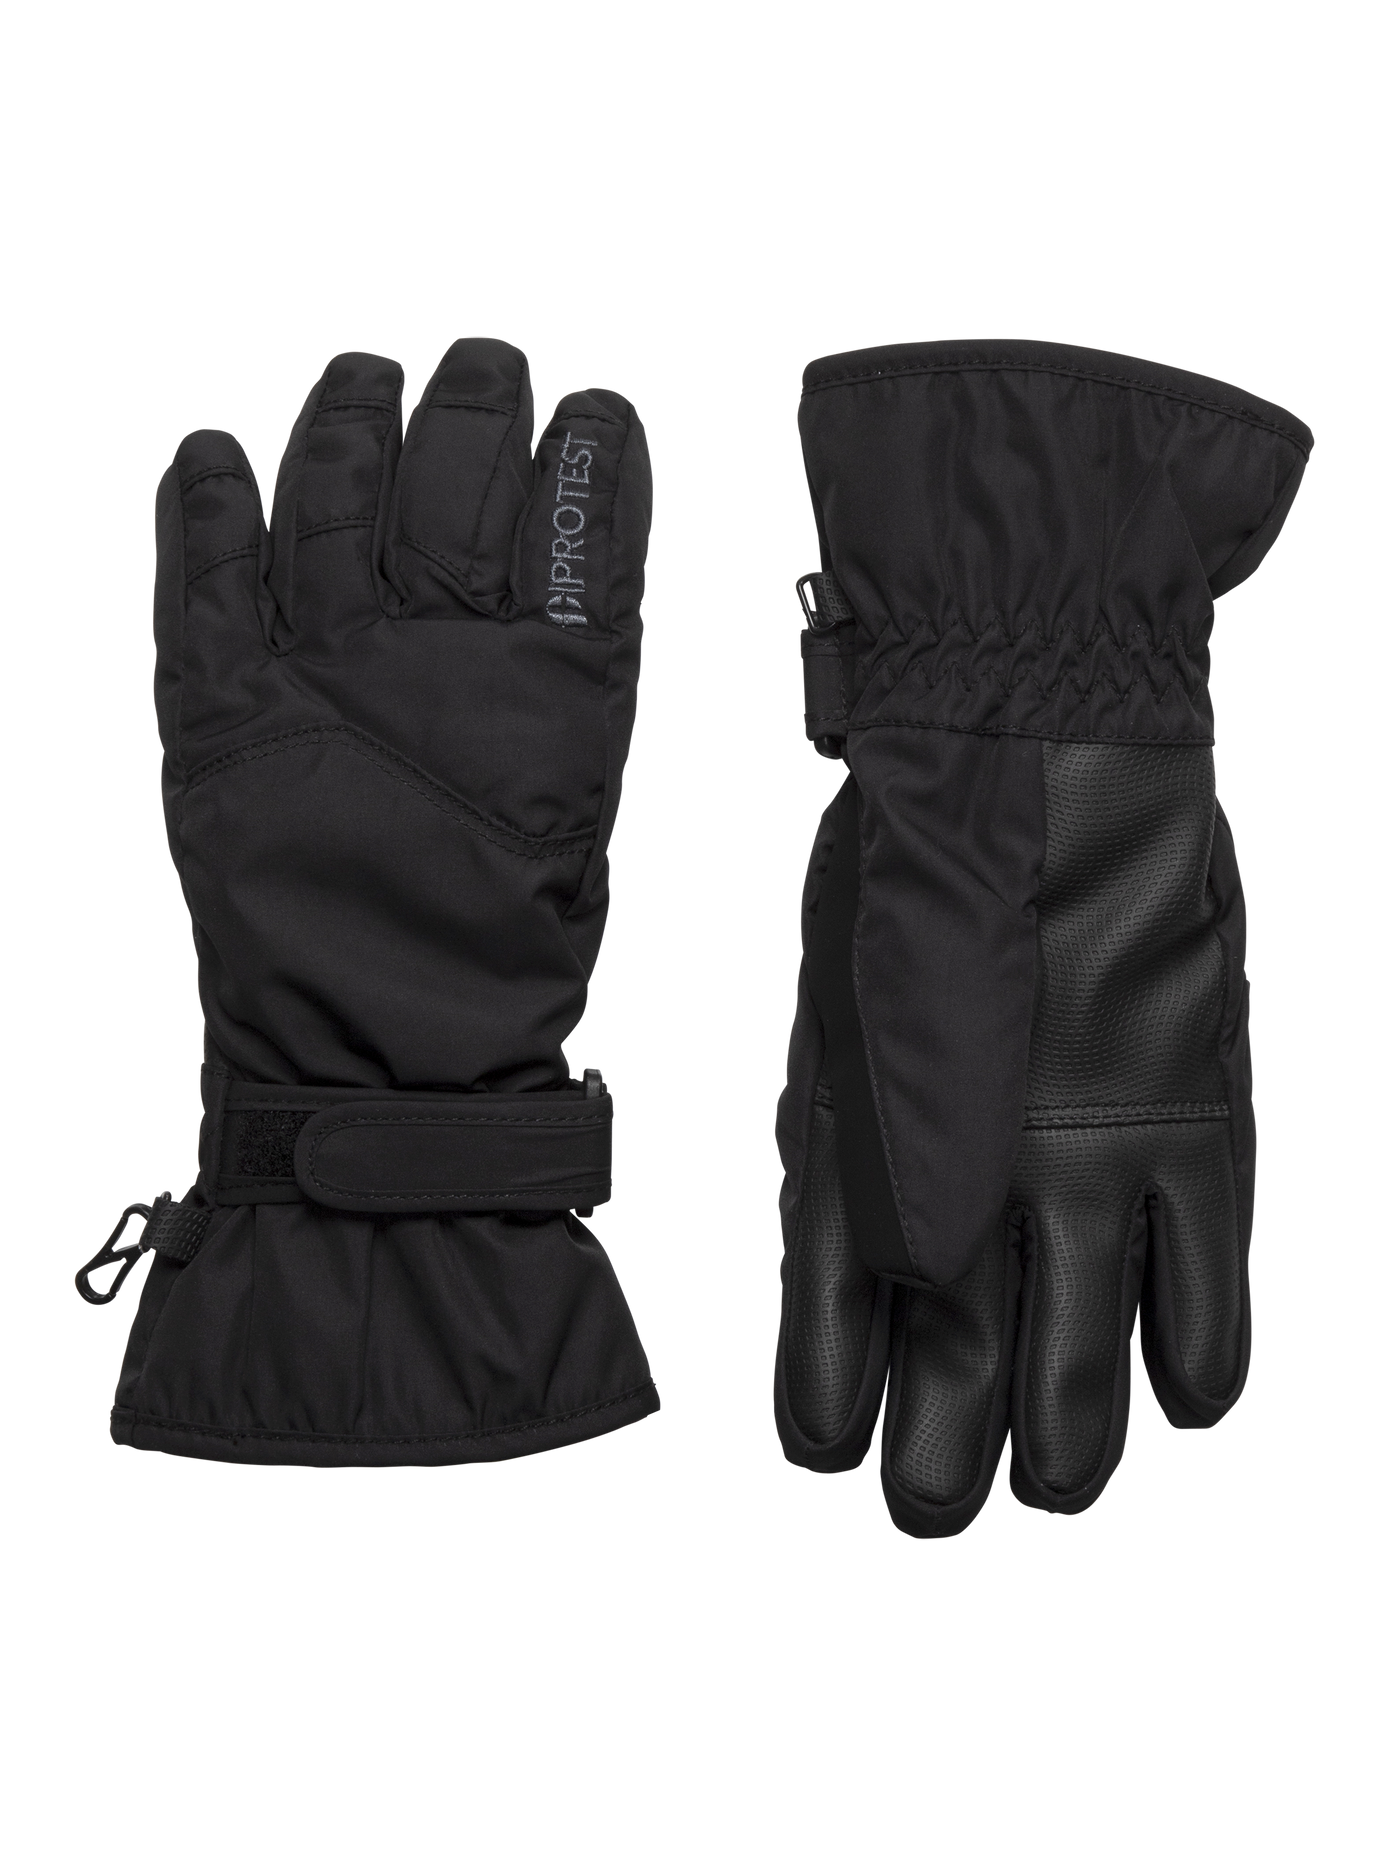 Protest Kids Carew JR Glove (age 11-14 years)